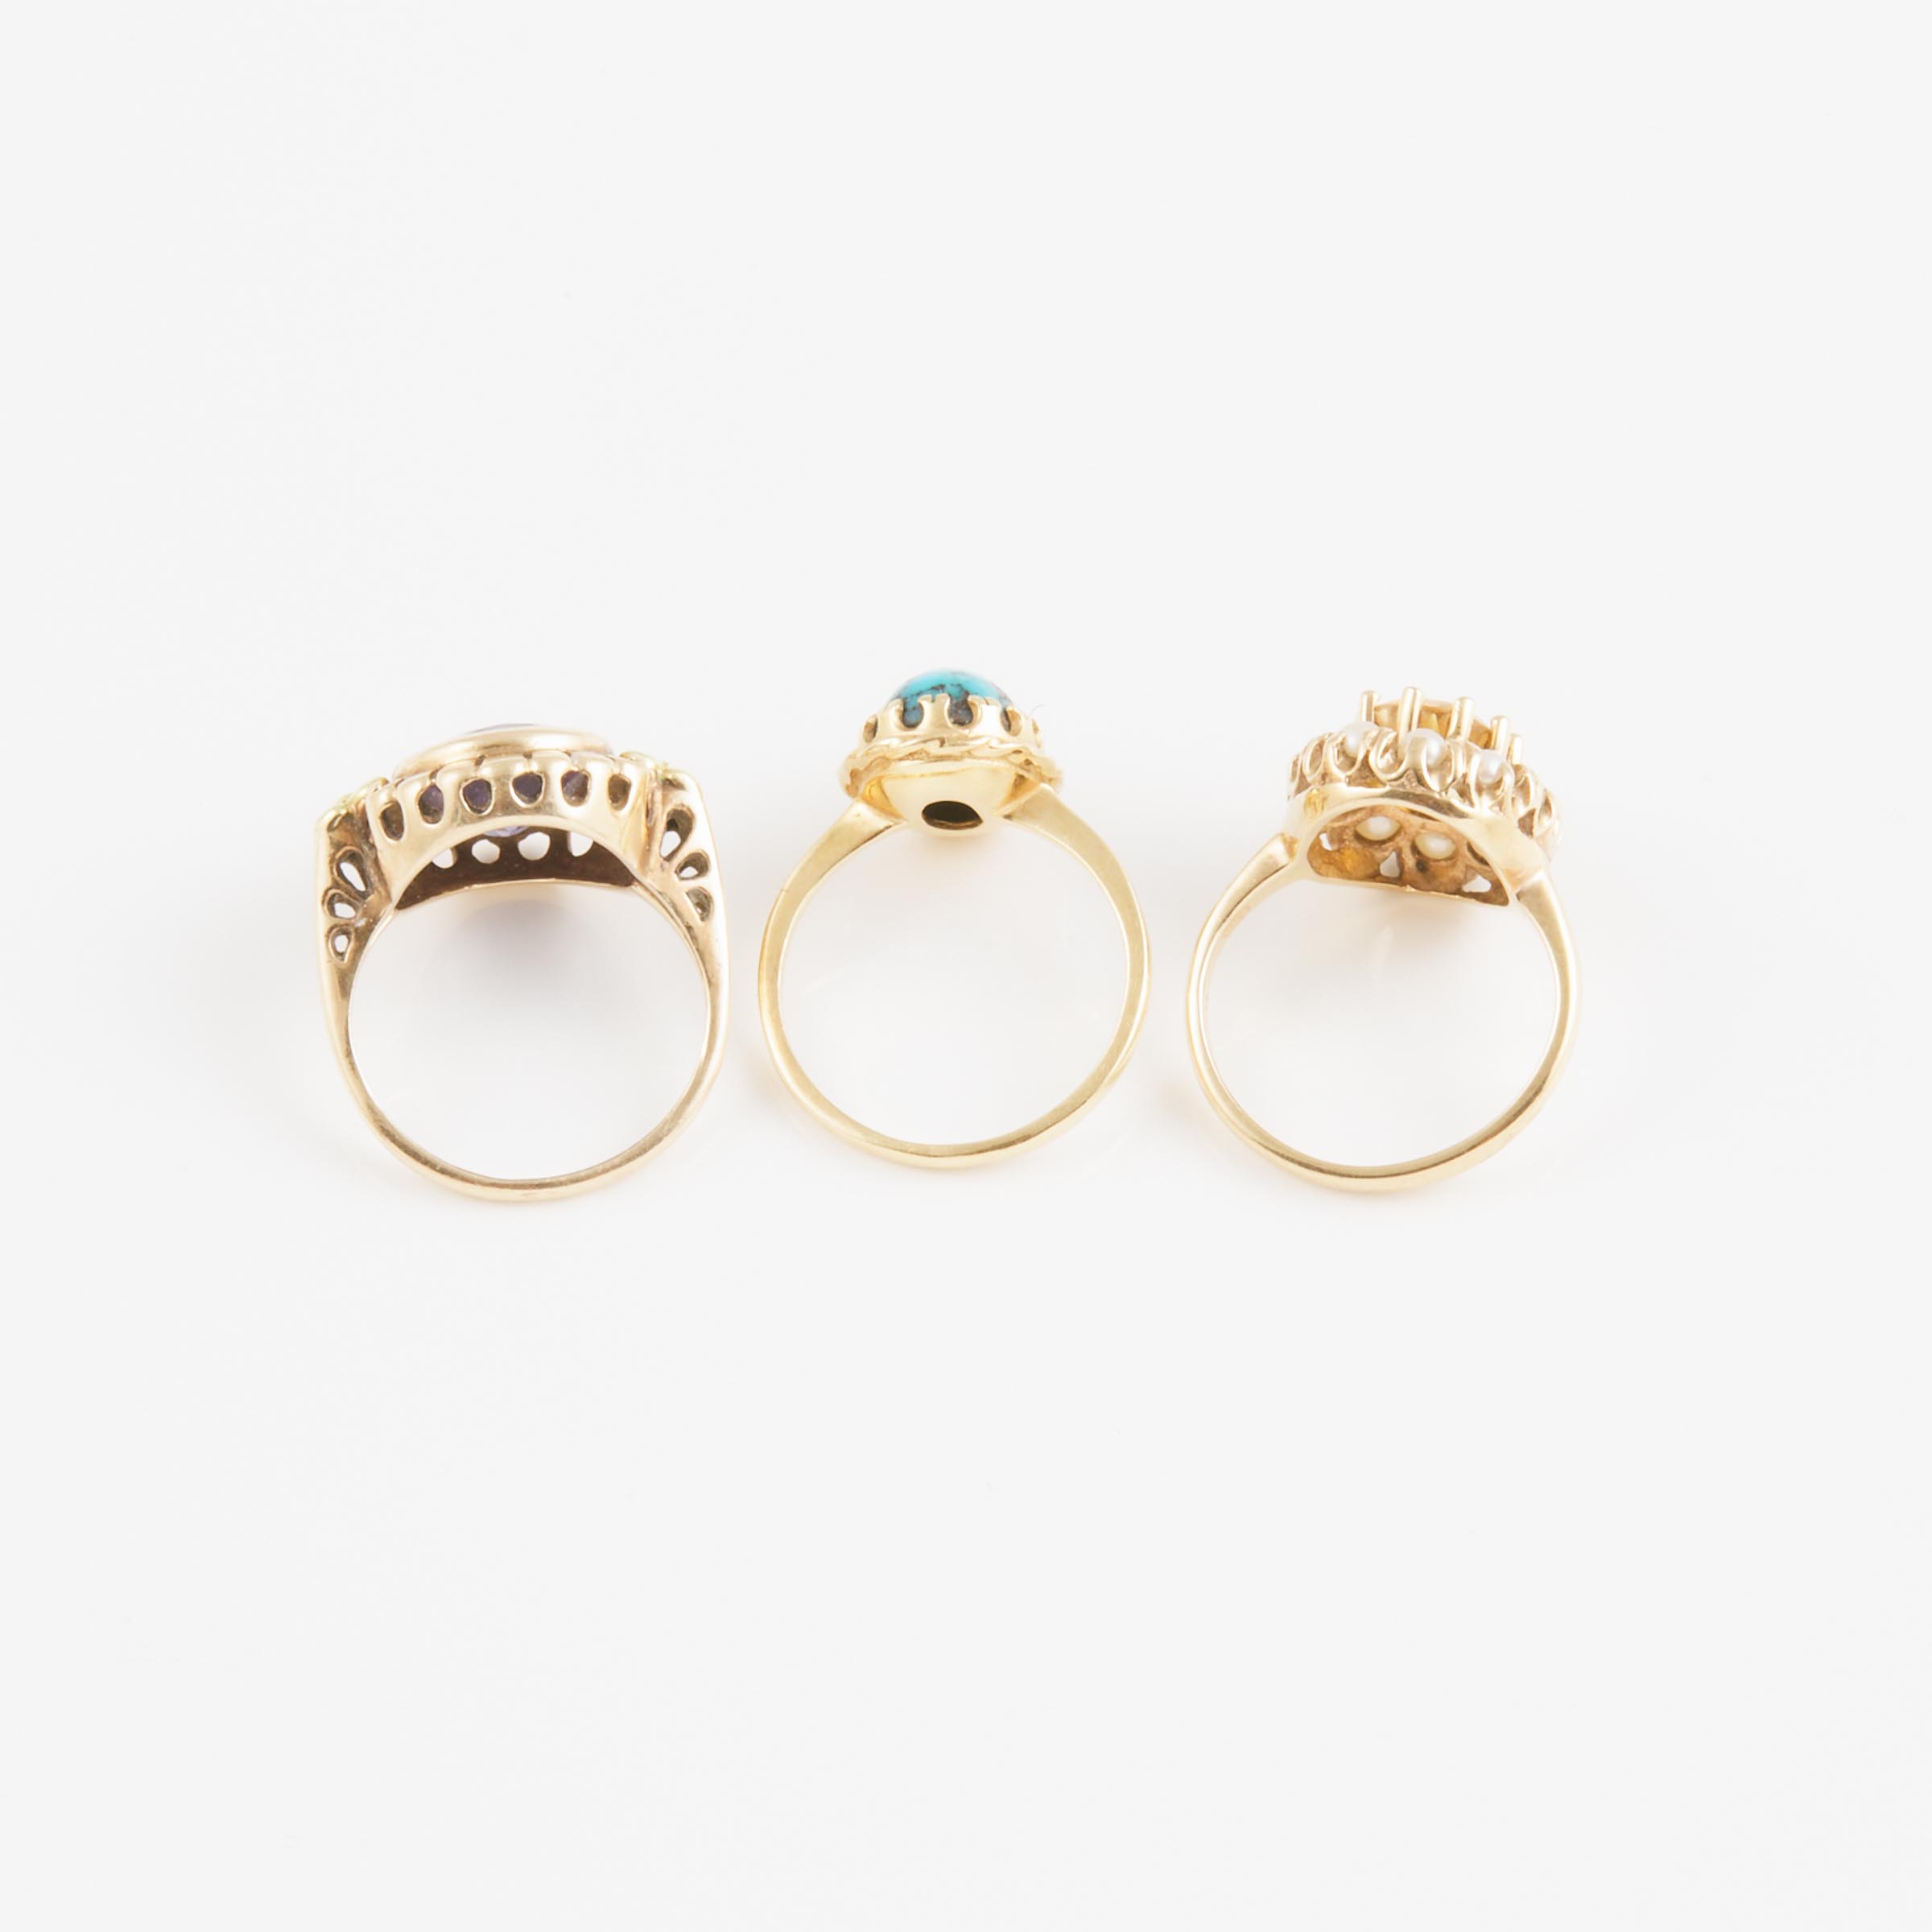 3 x Yellow Gold Rings